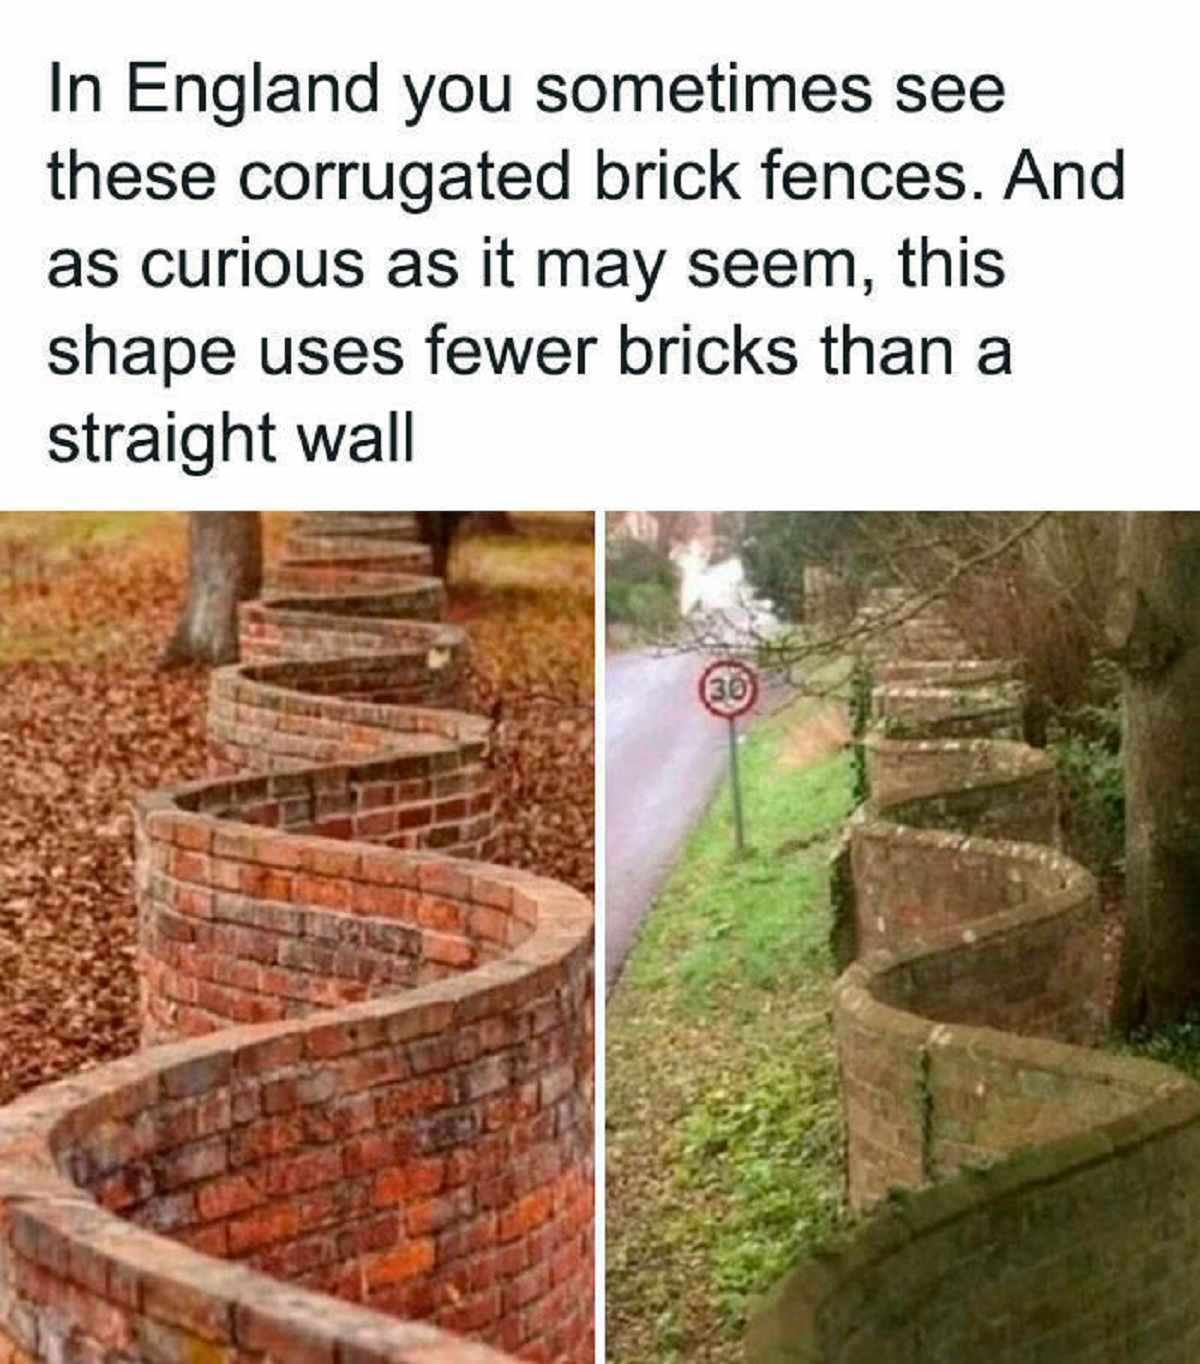 wavy wall vs straight wall - In England you sometimes see these corrugated brick fences. And as curious as it may seem, this shape uses fewer bricks than a straight wall 30